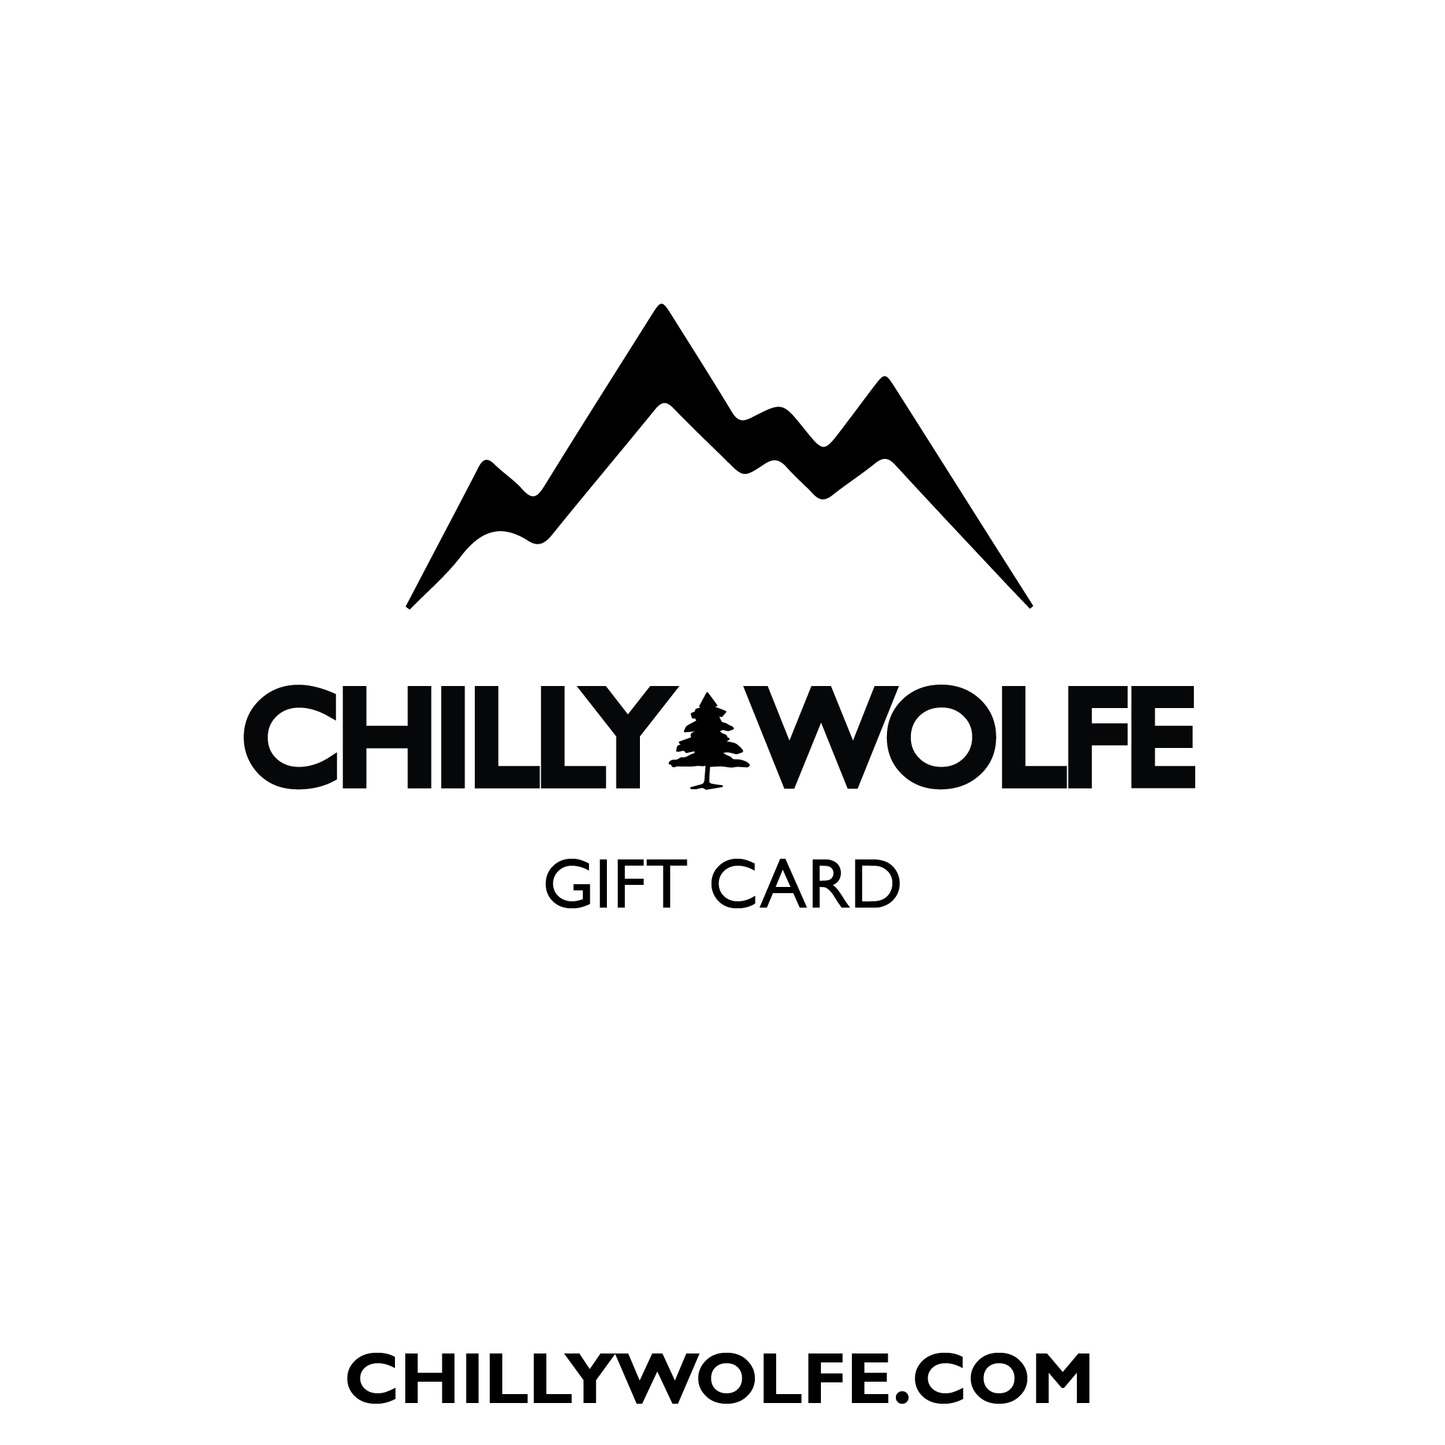 Chilly Wolfe Gift Card